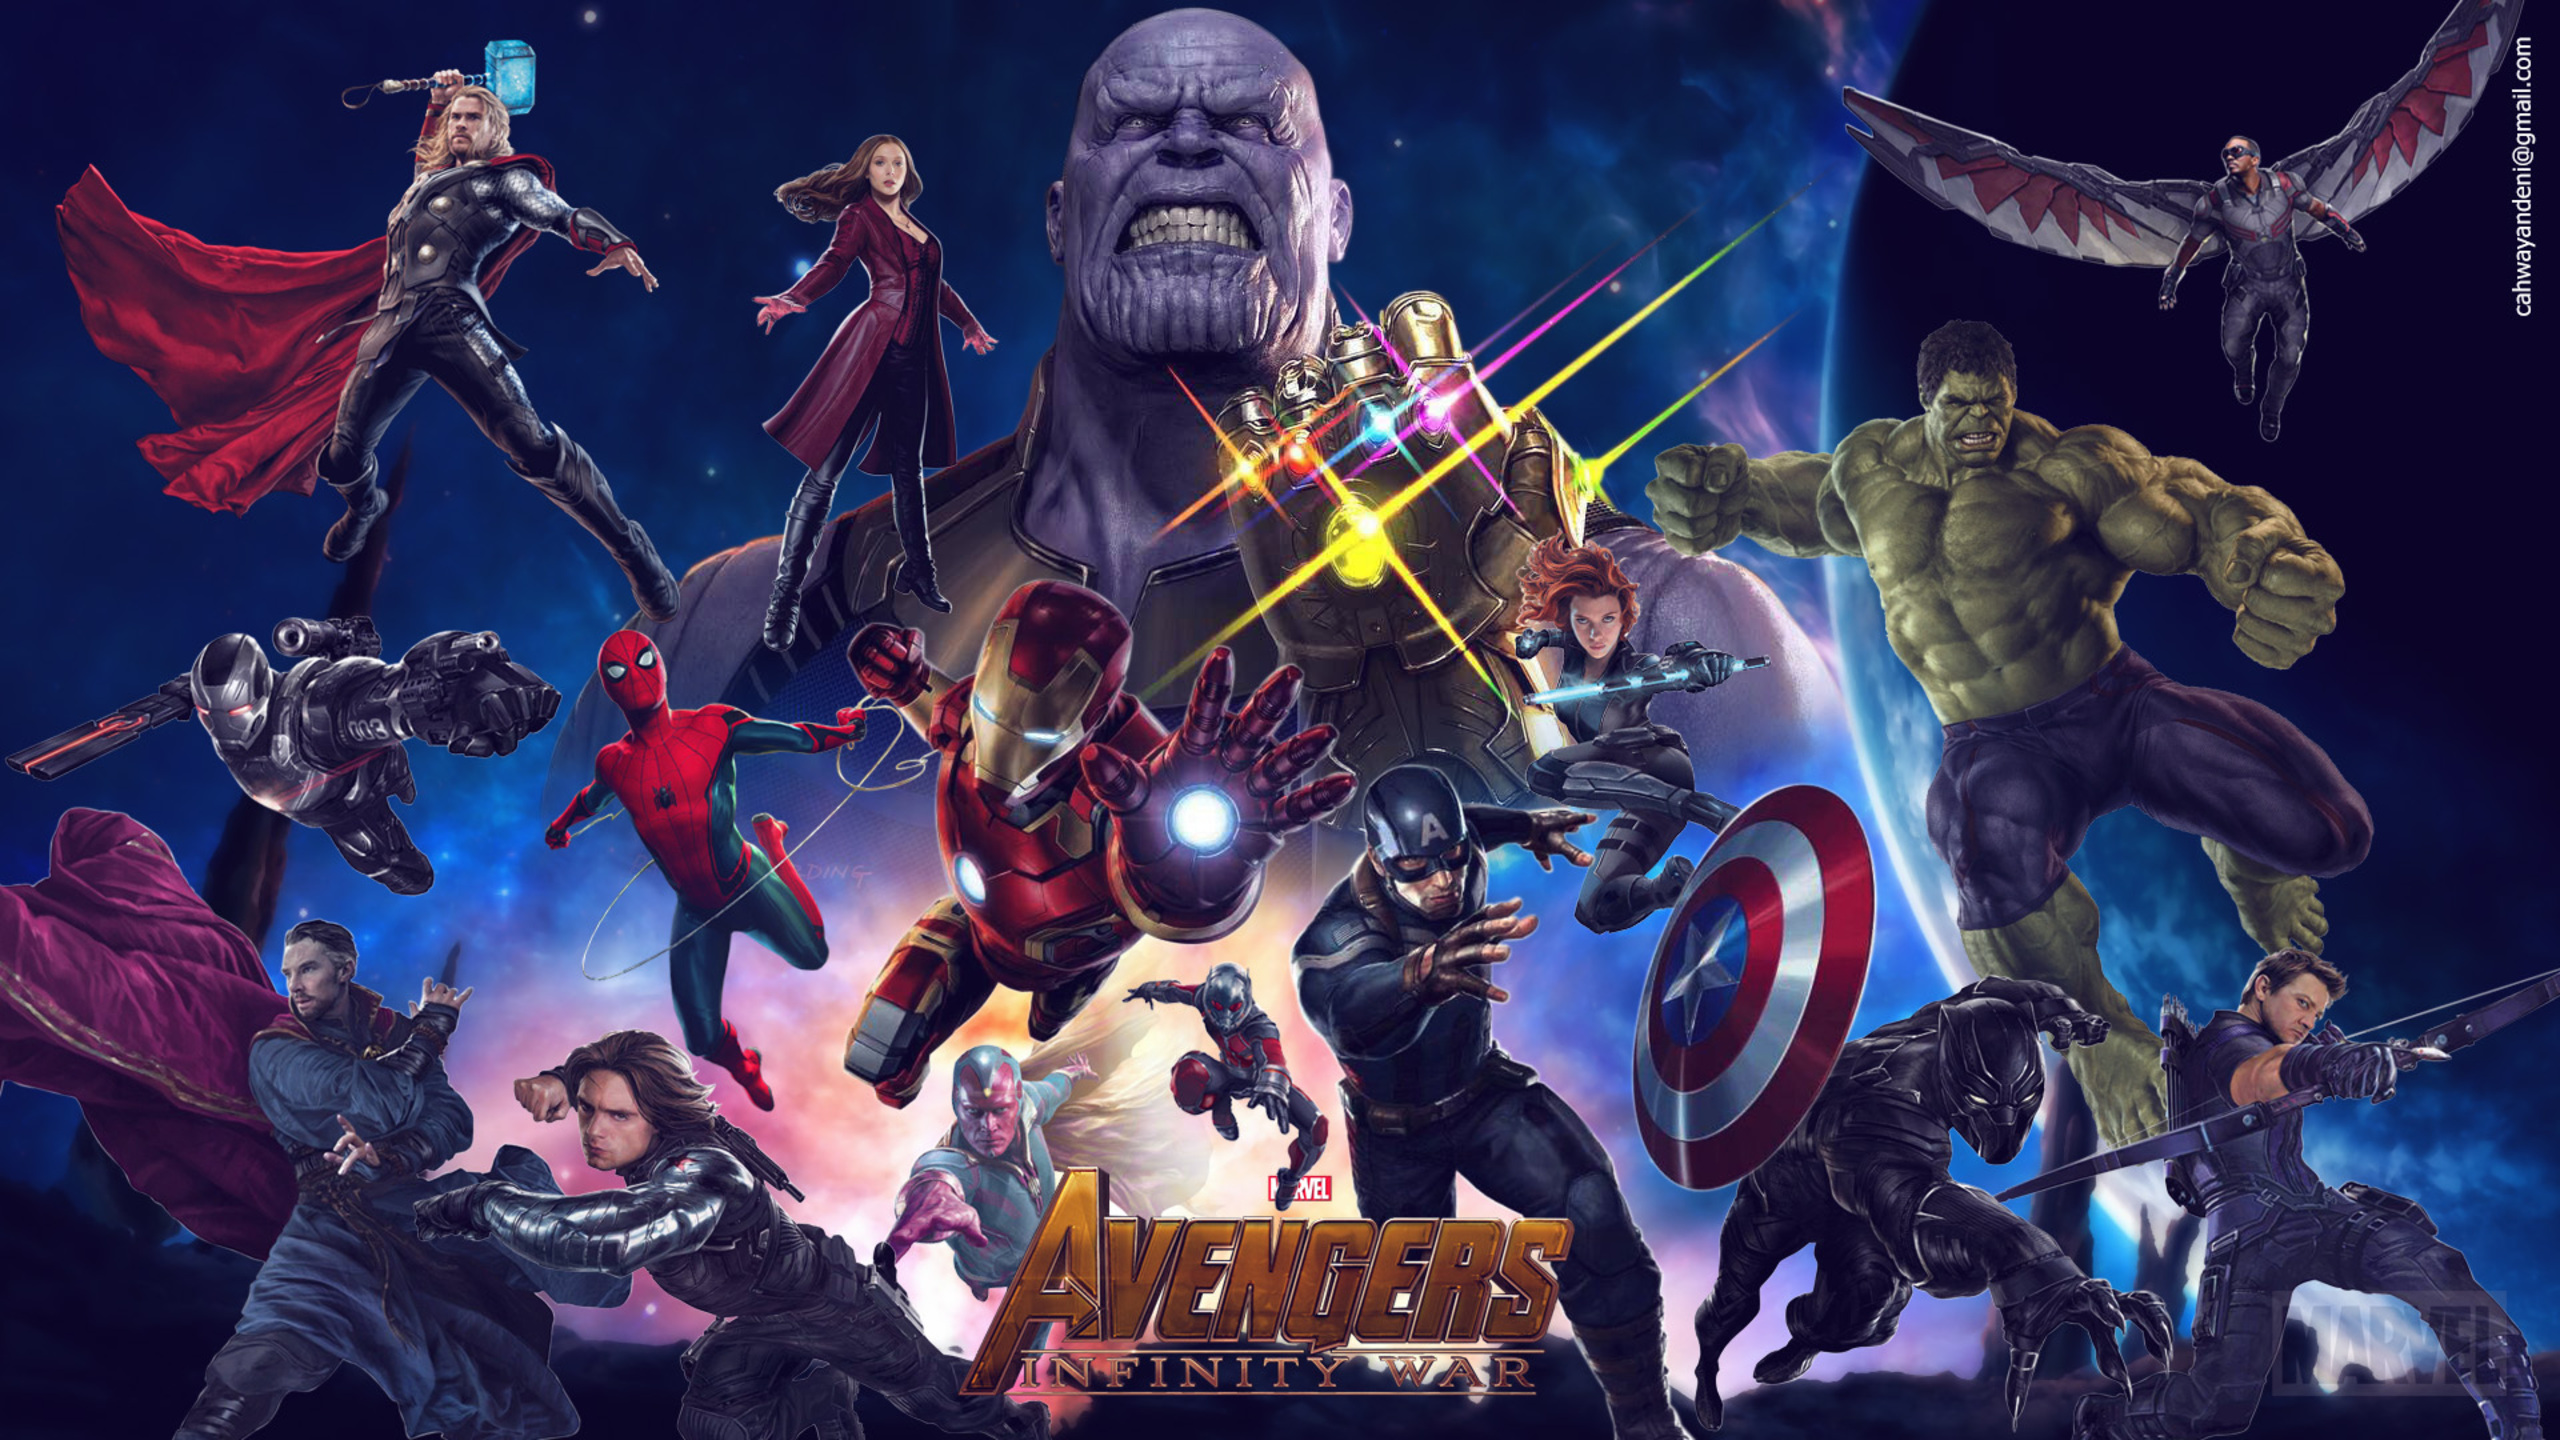 infinity war movie download for android